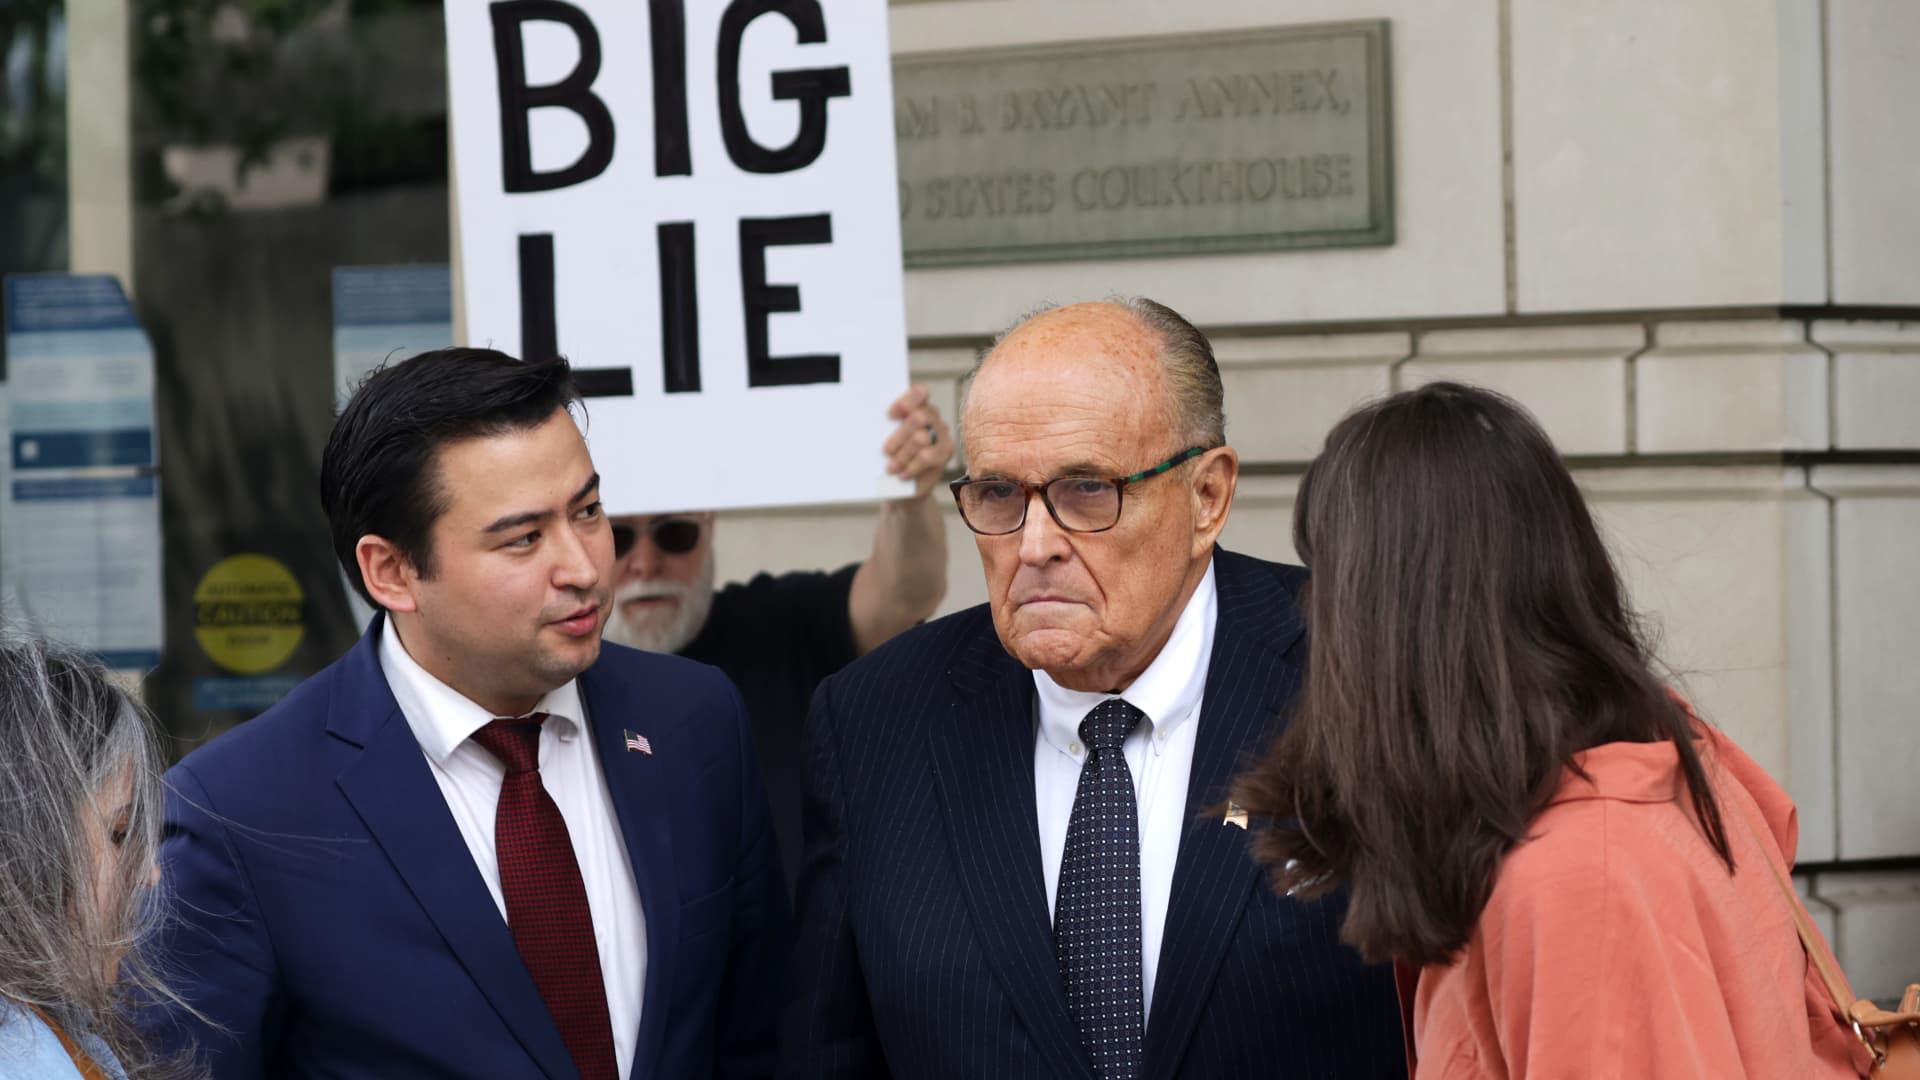 Former New York City Mayor and former personal lawyer for former President Donald Trump Rudy Giuliani talks to members of the press before he leaves the U.S. District Court on May 19, 2023 in Washington, DC.